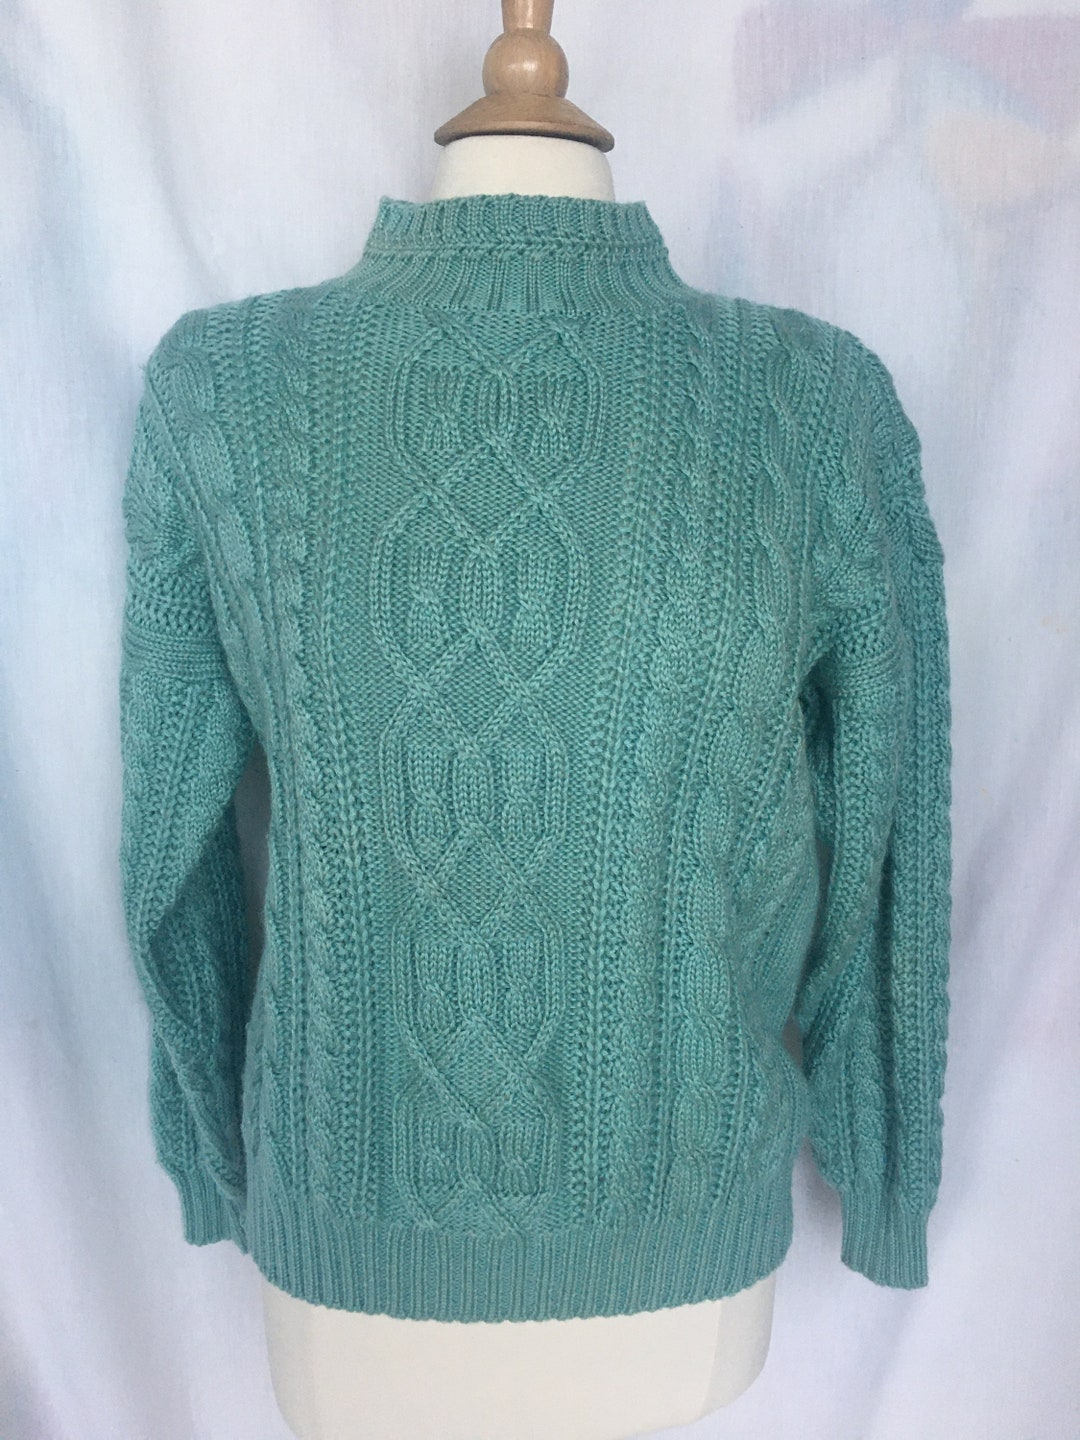 Vintage 90s Casual Corner Seafoam Green Cable Knit Mock - Etsy